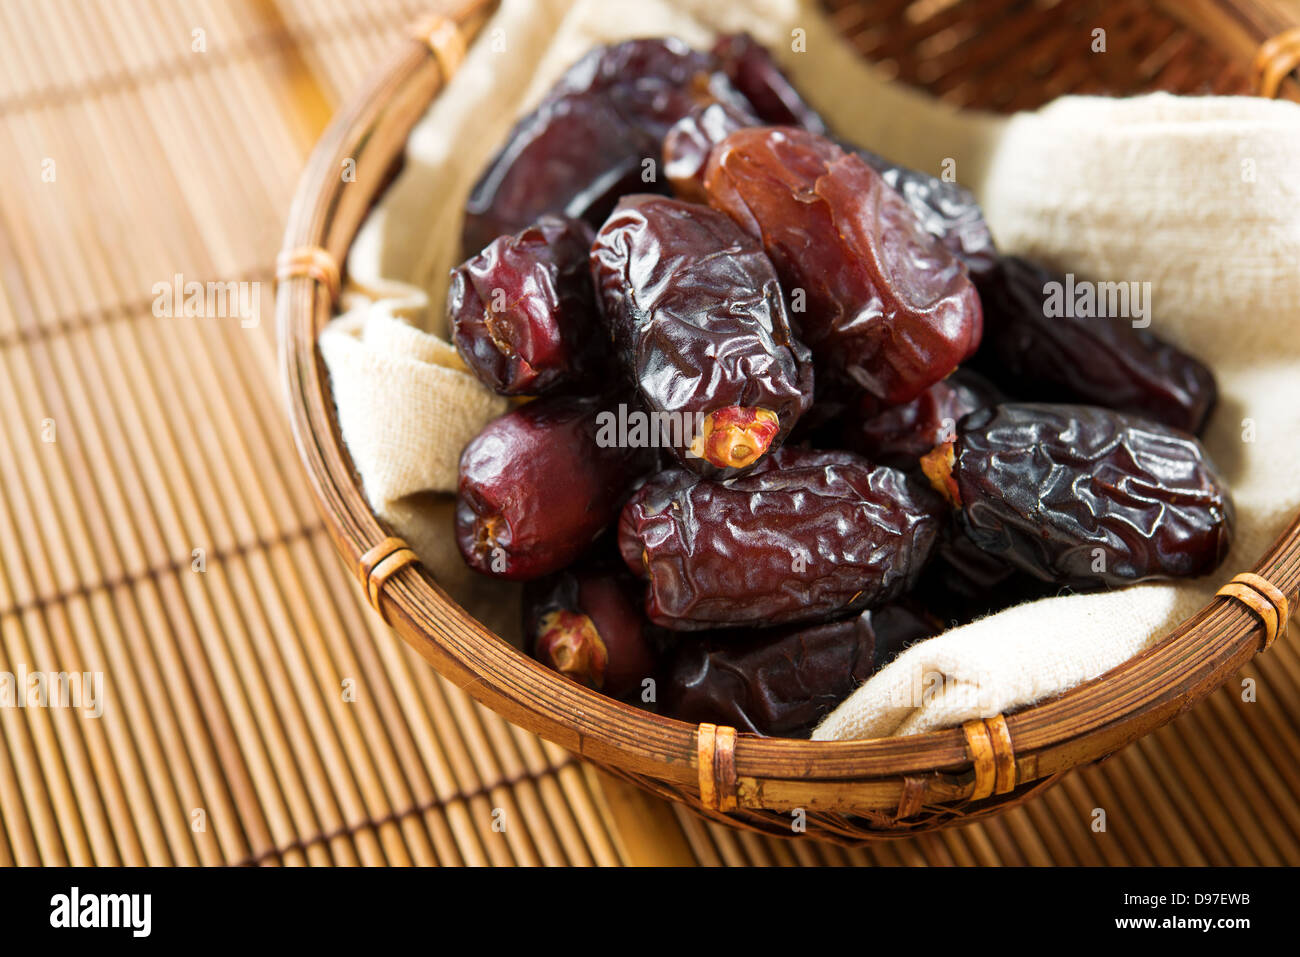 Dried date palm fruits or kurma, ramadan food which eaten in fasting month.  Pile of fresh dried date fruits in bamboo basket Stock Photo - Alamy